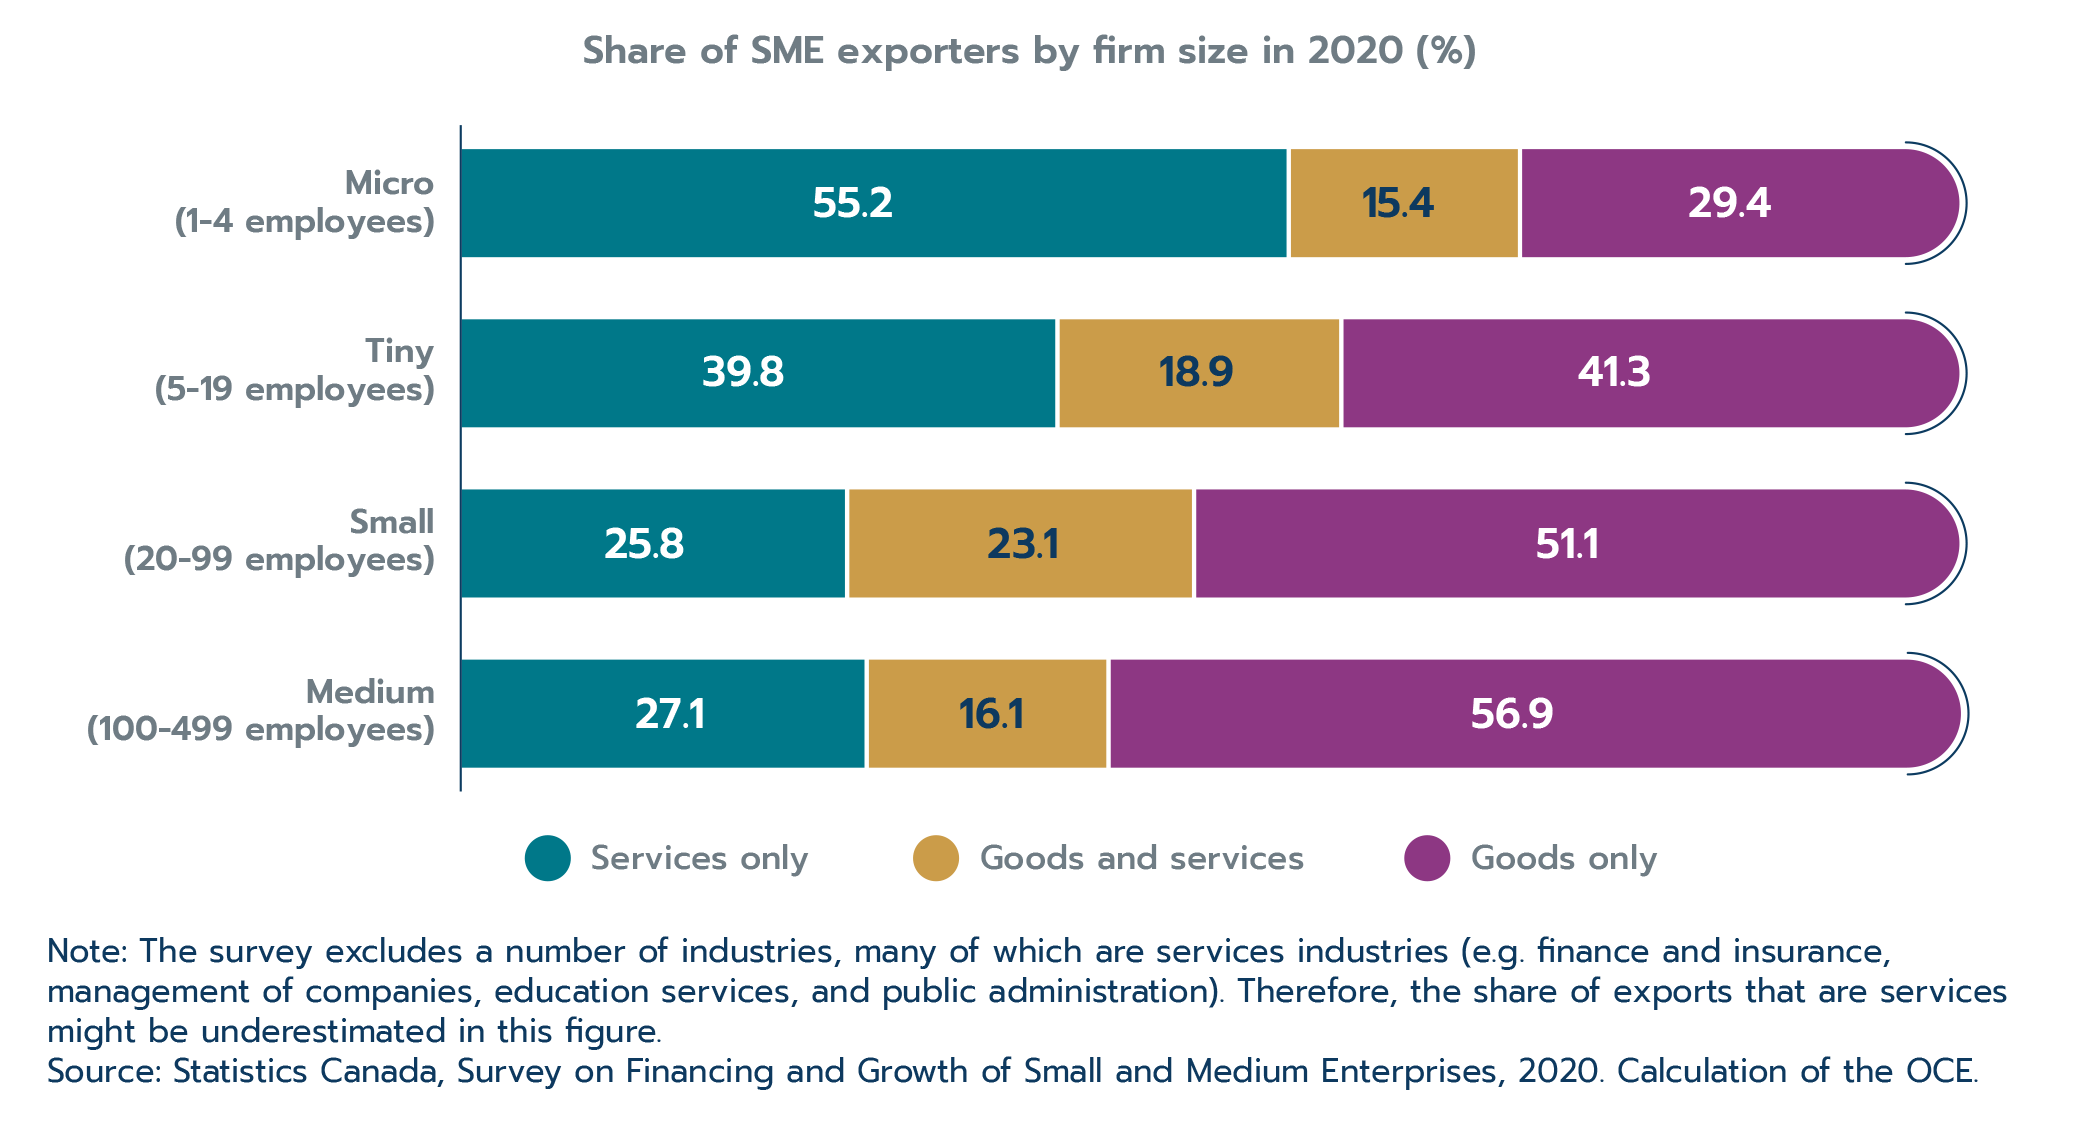 Figure 2.6: Smaller SMEs export more services